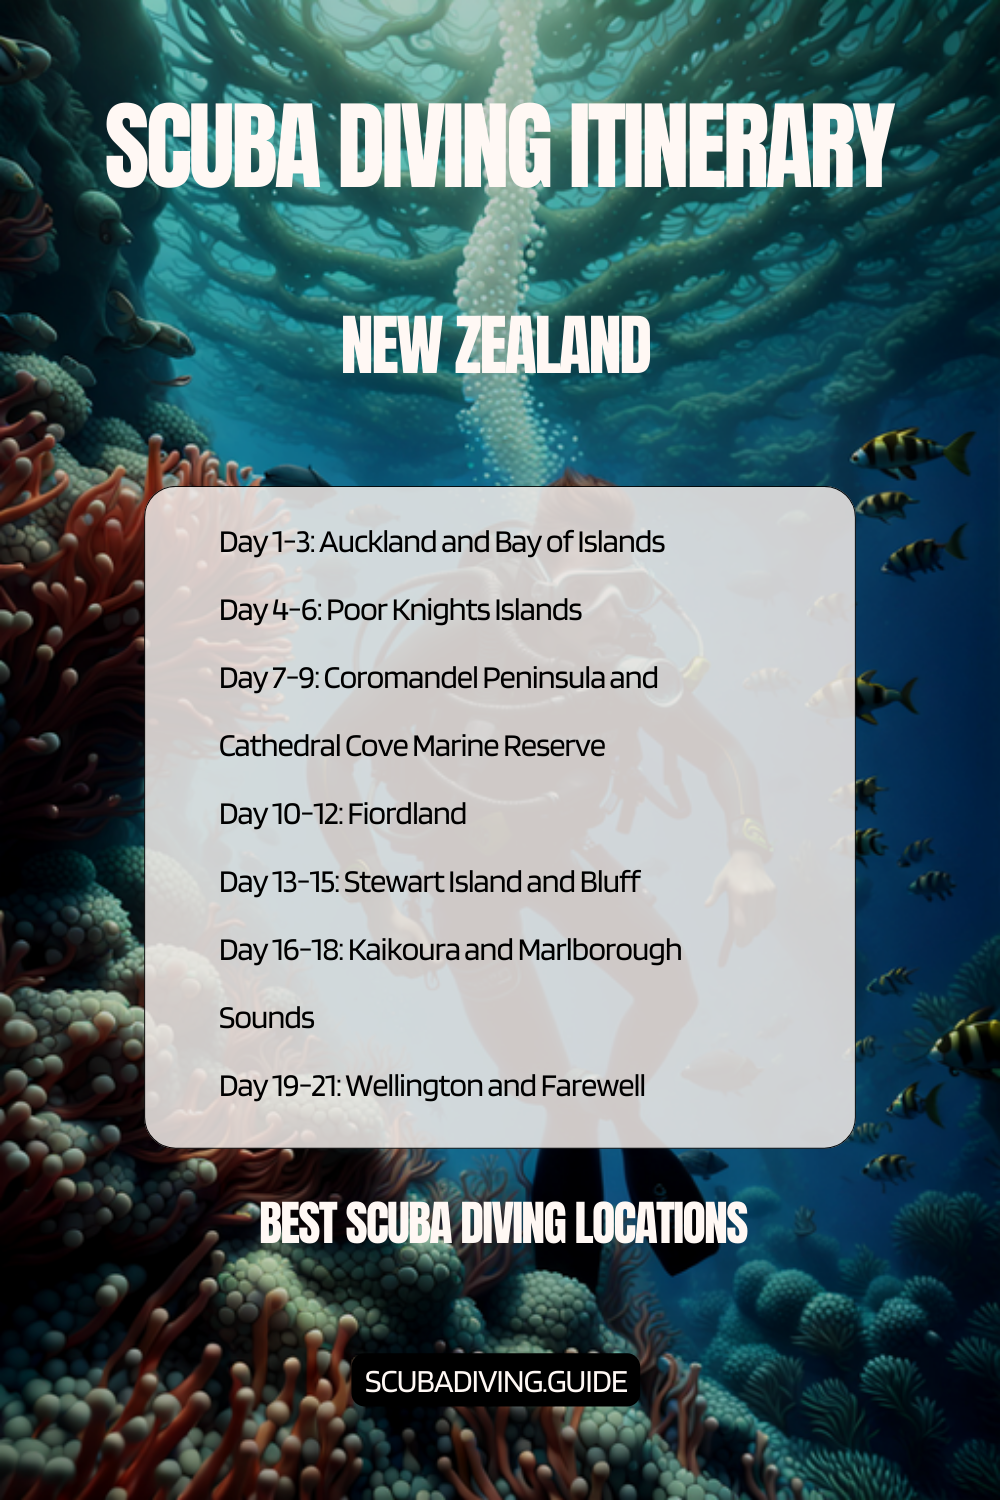 New Zealand Recommended Scuba Diving Itinerary